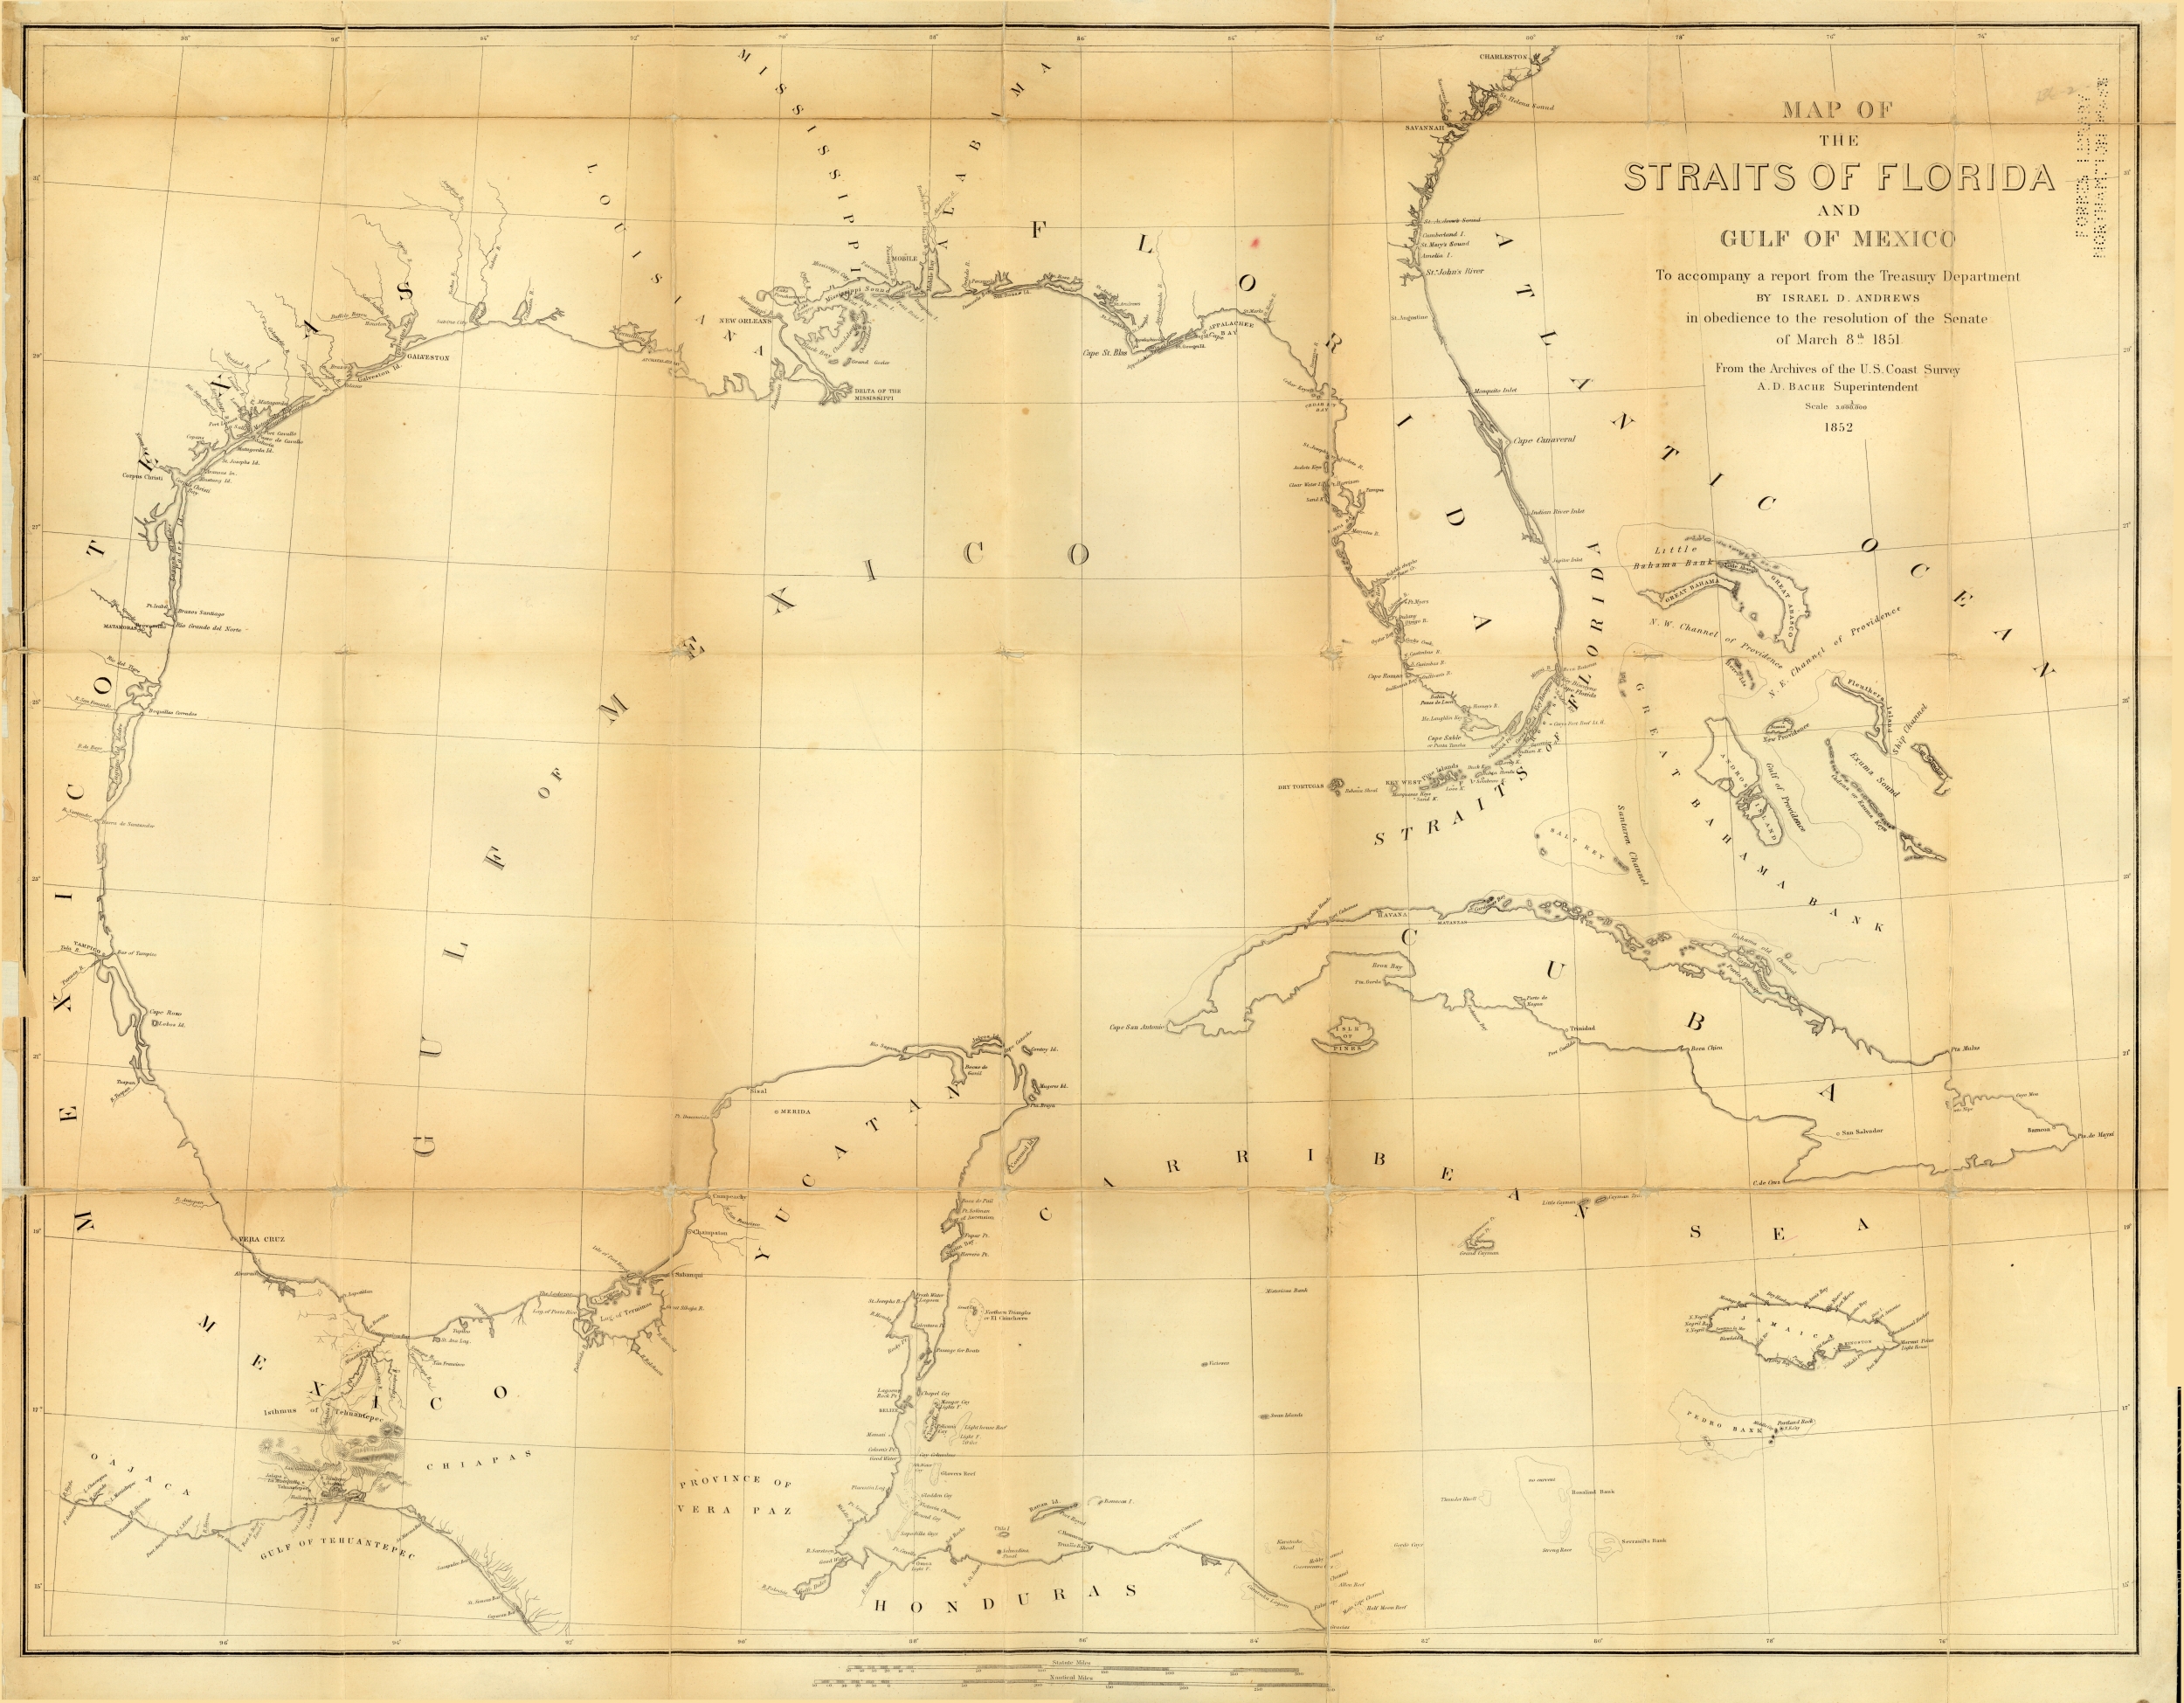 Map of Strait of Florida, 1852